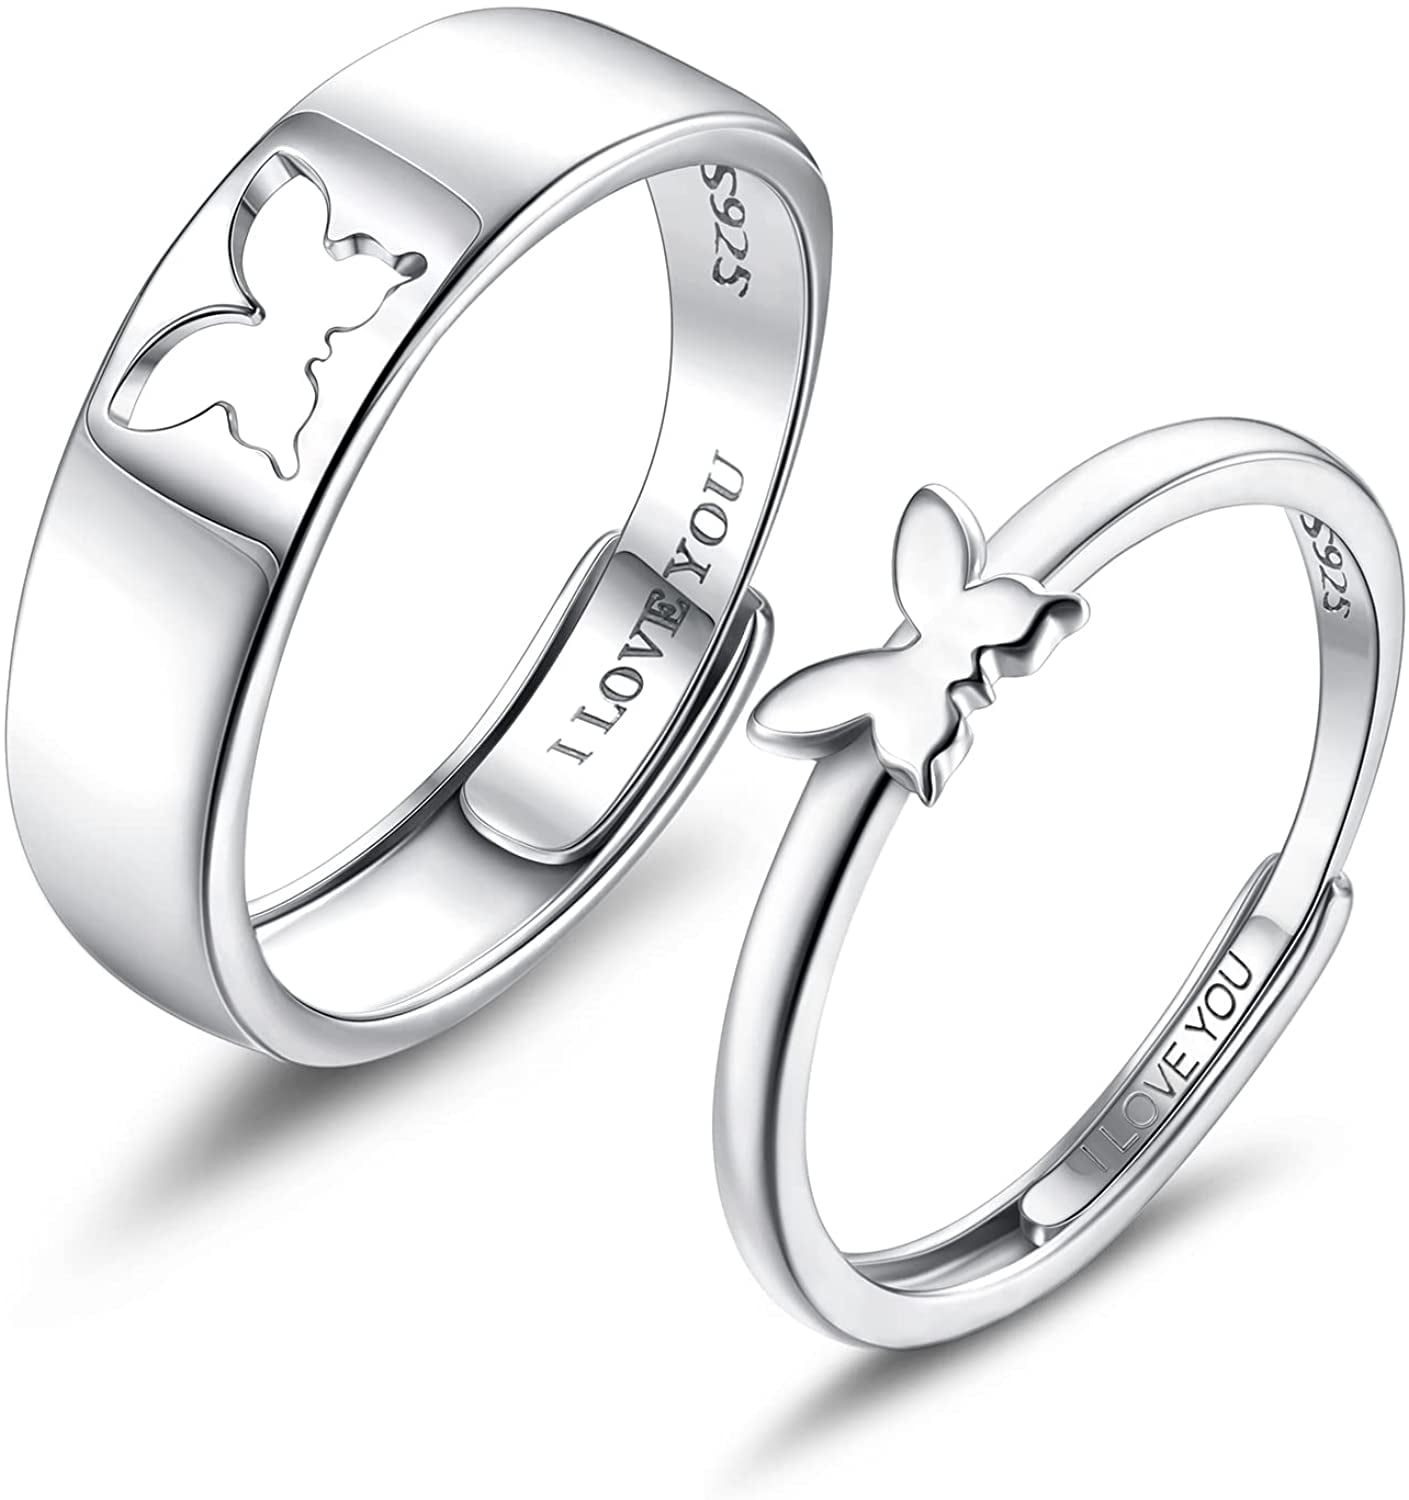 Jstyle Matching Rings Couples 925 Sterling Silver Heart Promise I Love You Engagement Wedding Ring Sets Him Her Adjustable Butterfly 7bc3fa34 ee56 4f37 89ee c39ac14da9c0.3b813a3759368003a567c57329092b33